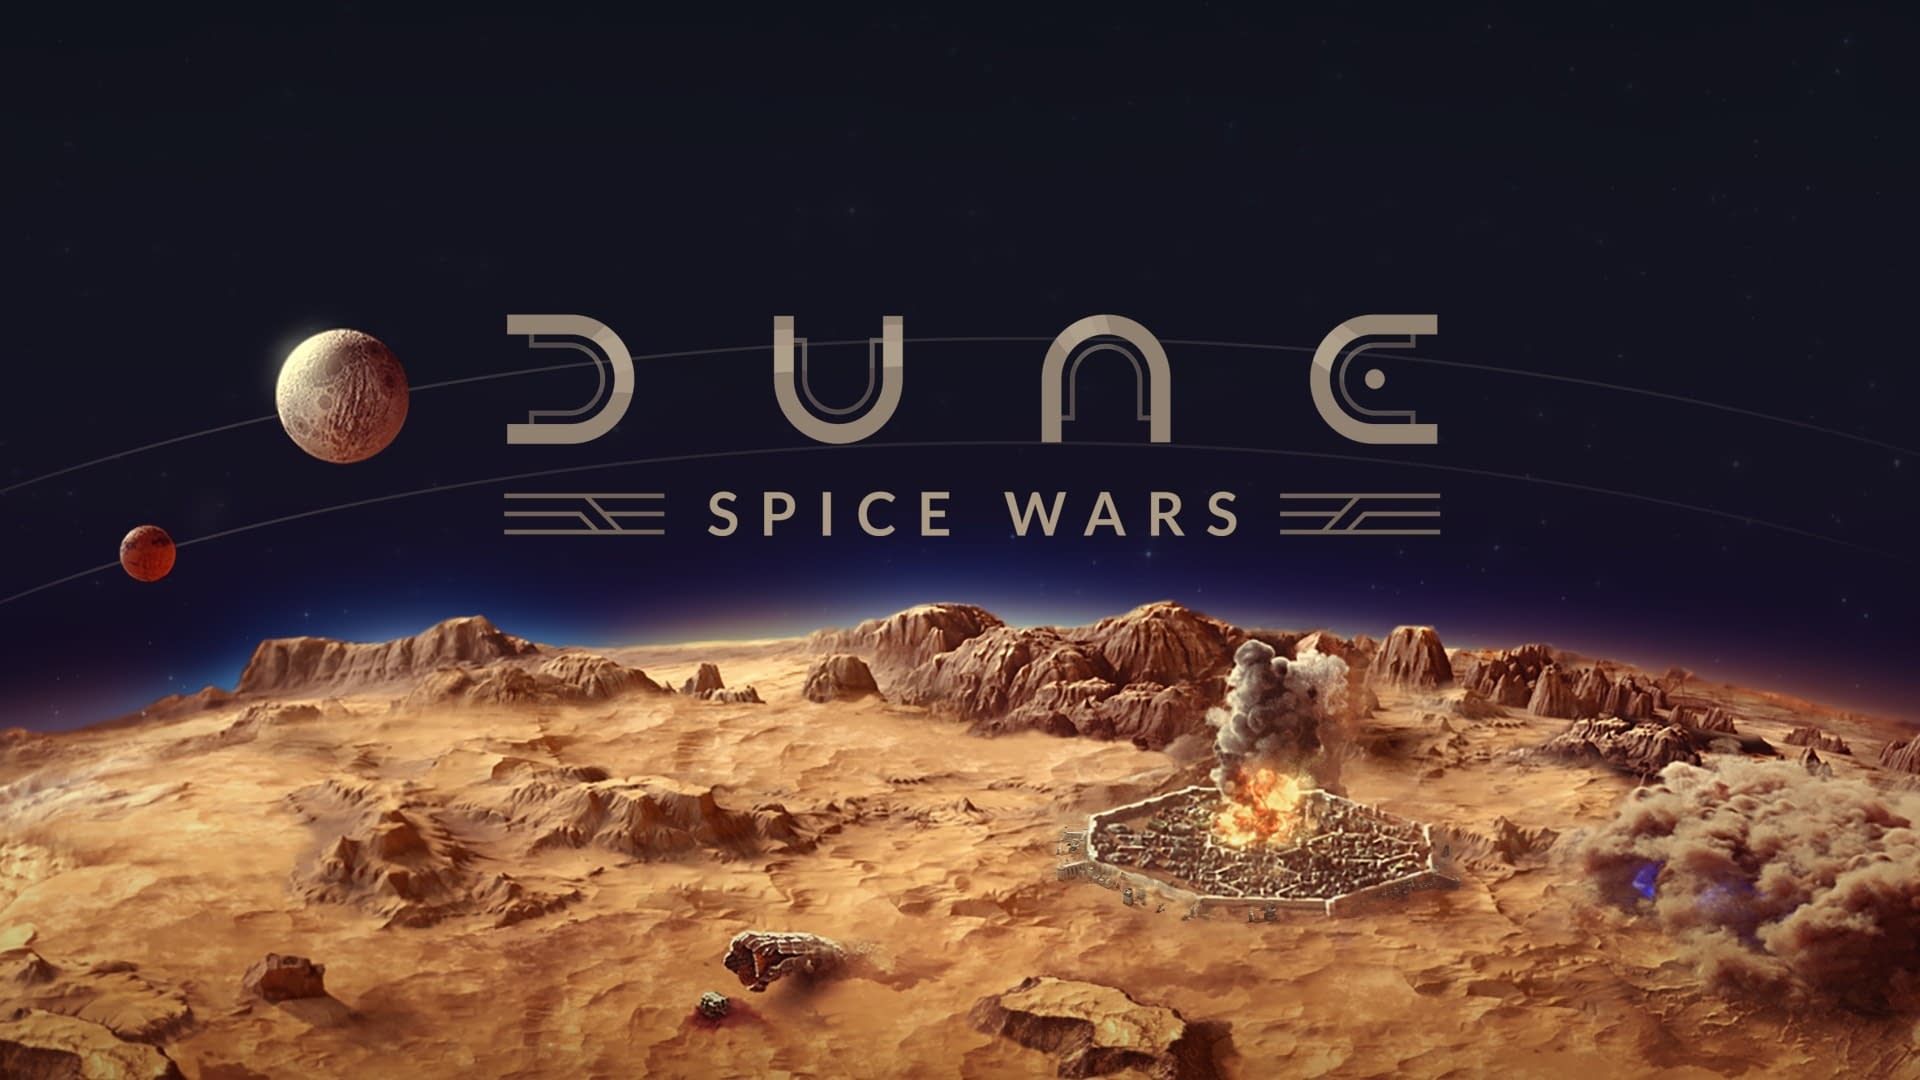 Dune: Spice Wars Fights Full Version: Released Date Announced